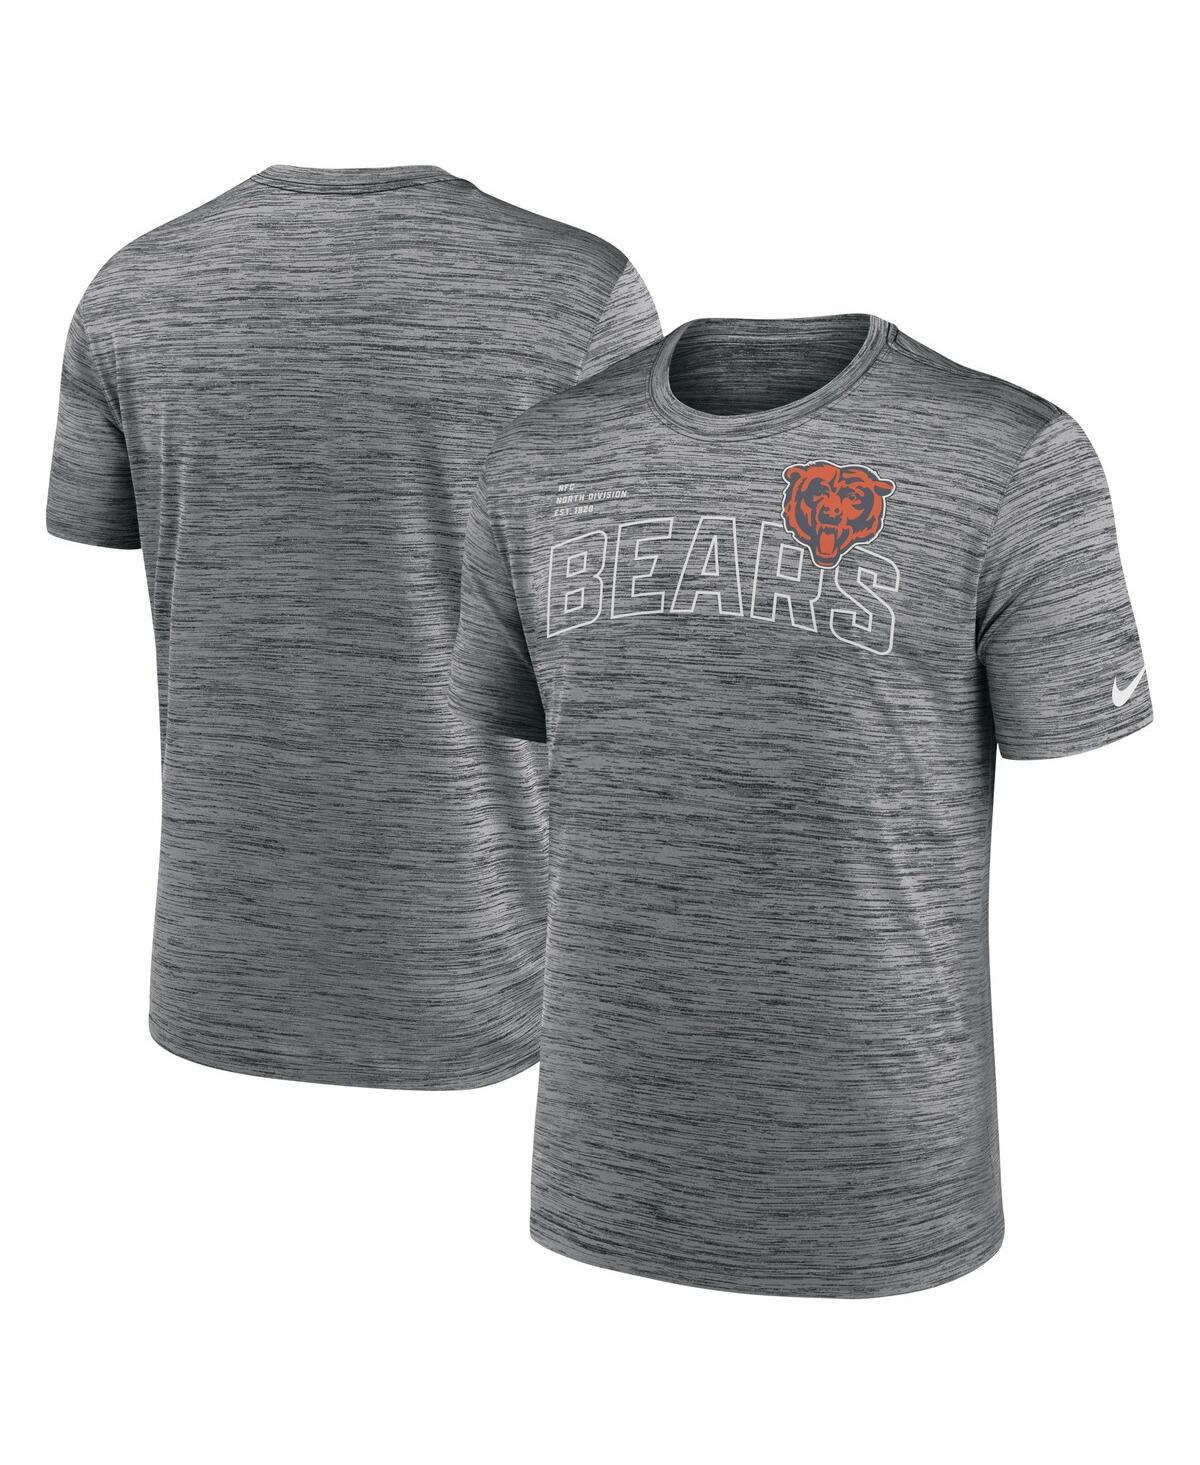 Shop Nike Men's  Anthracite Chicago Bears Velocity Arch Performance T-shirt